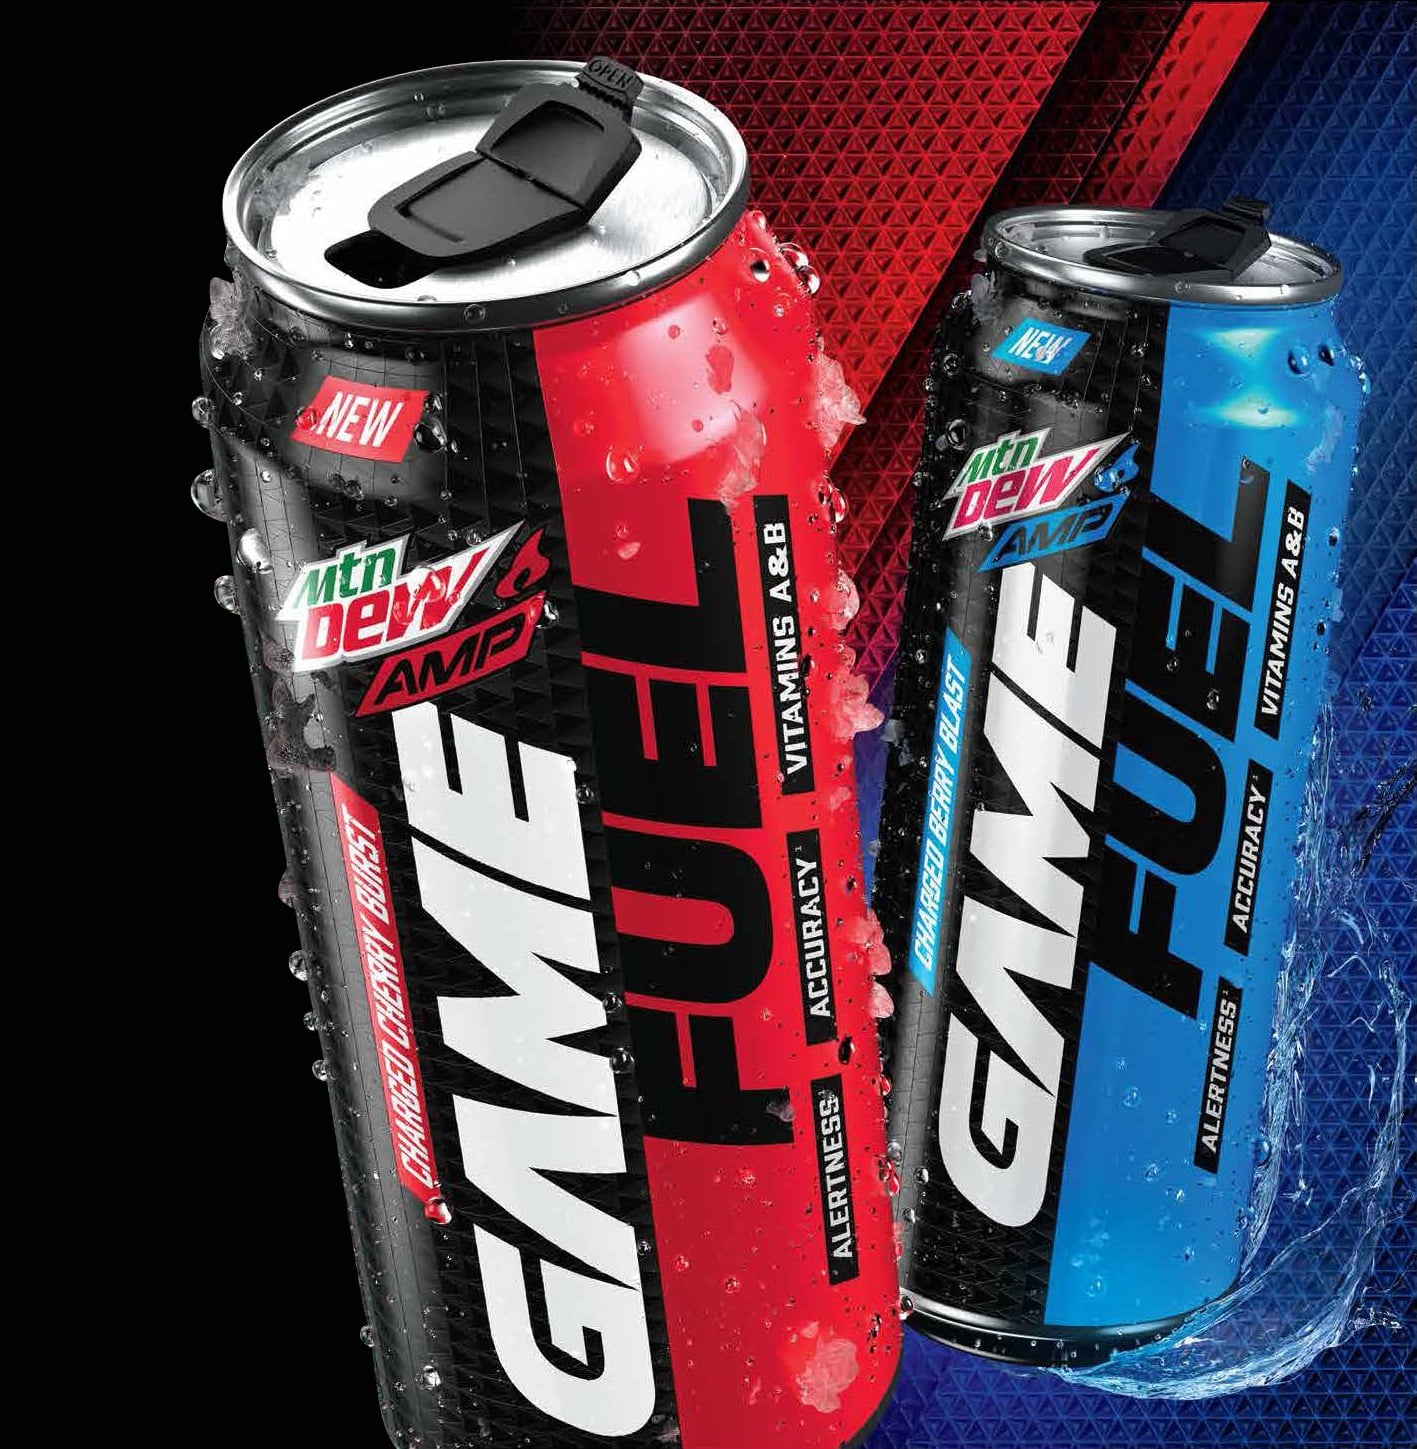 The new Mountain Dew Amp cans include a resealable tab.